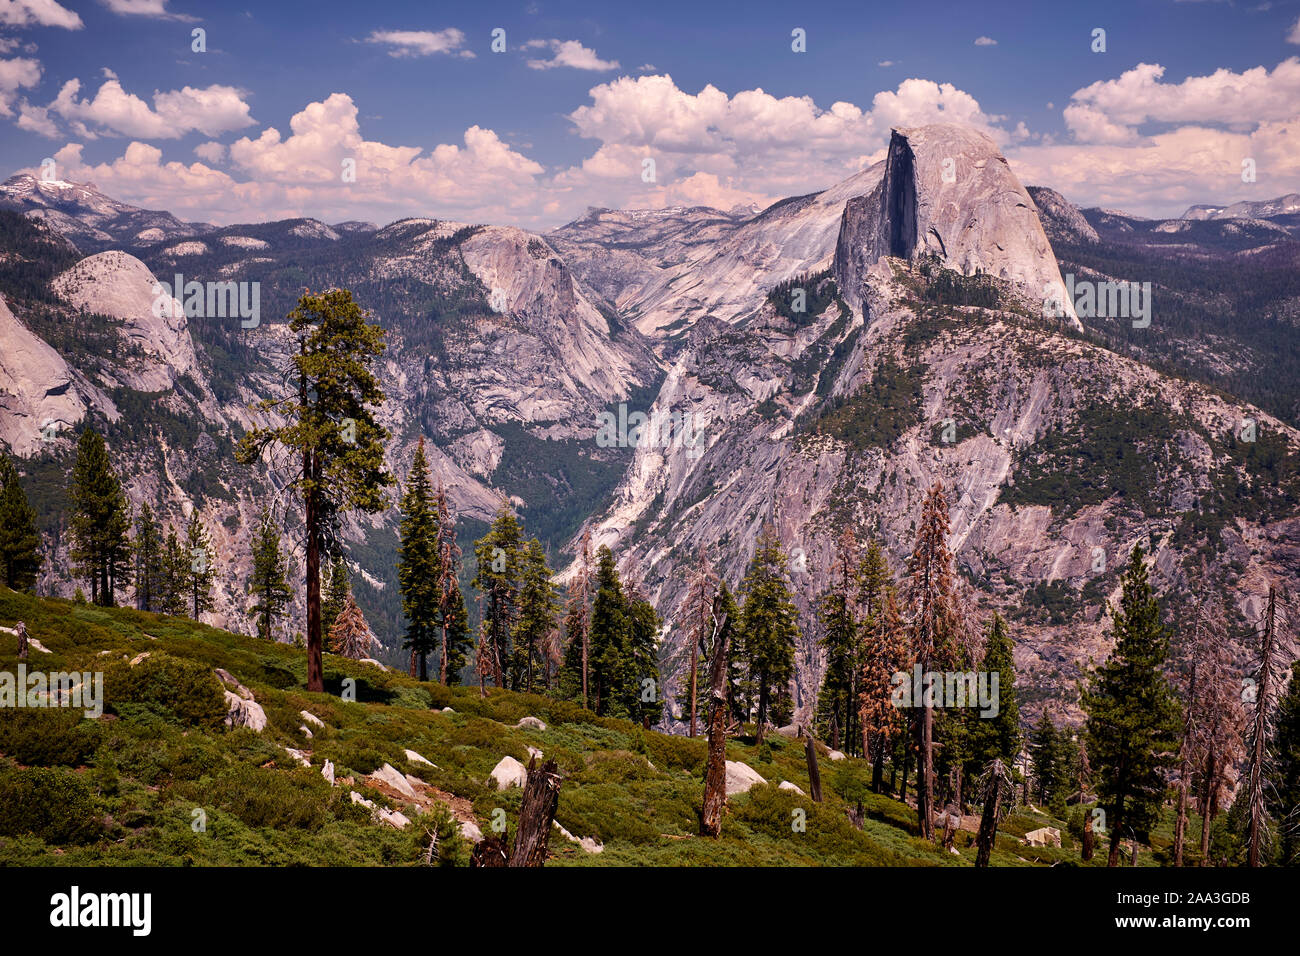 Half Dome with Nevada and Vernal Falls in the background, Yosemite National Park, California, USA Stock Photo